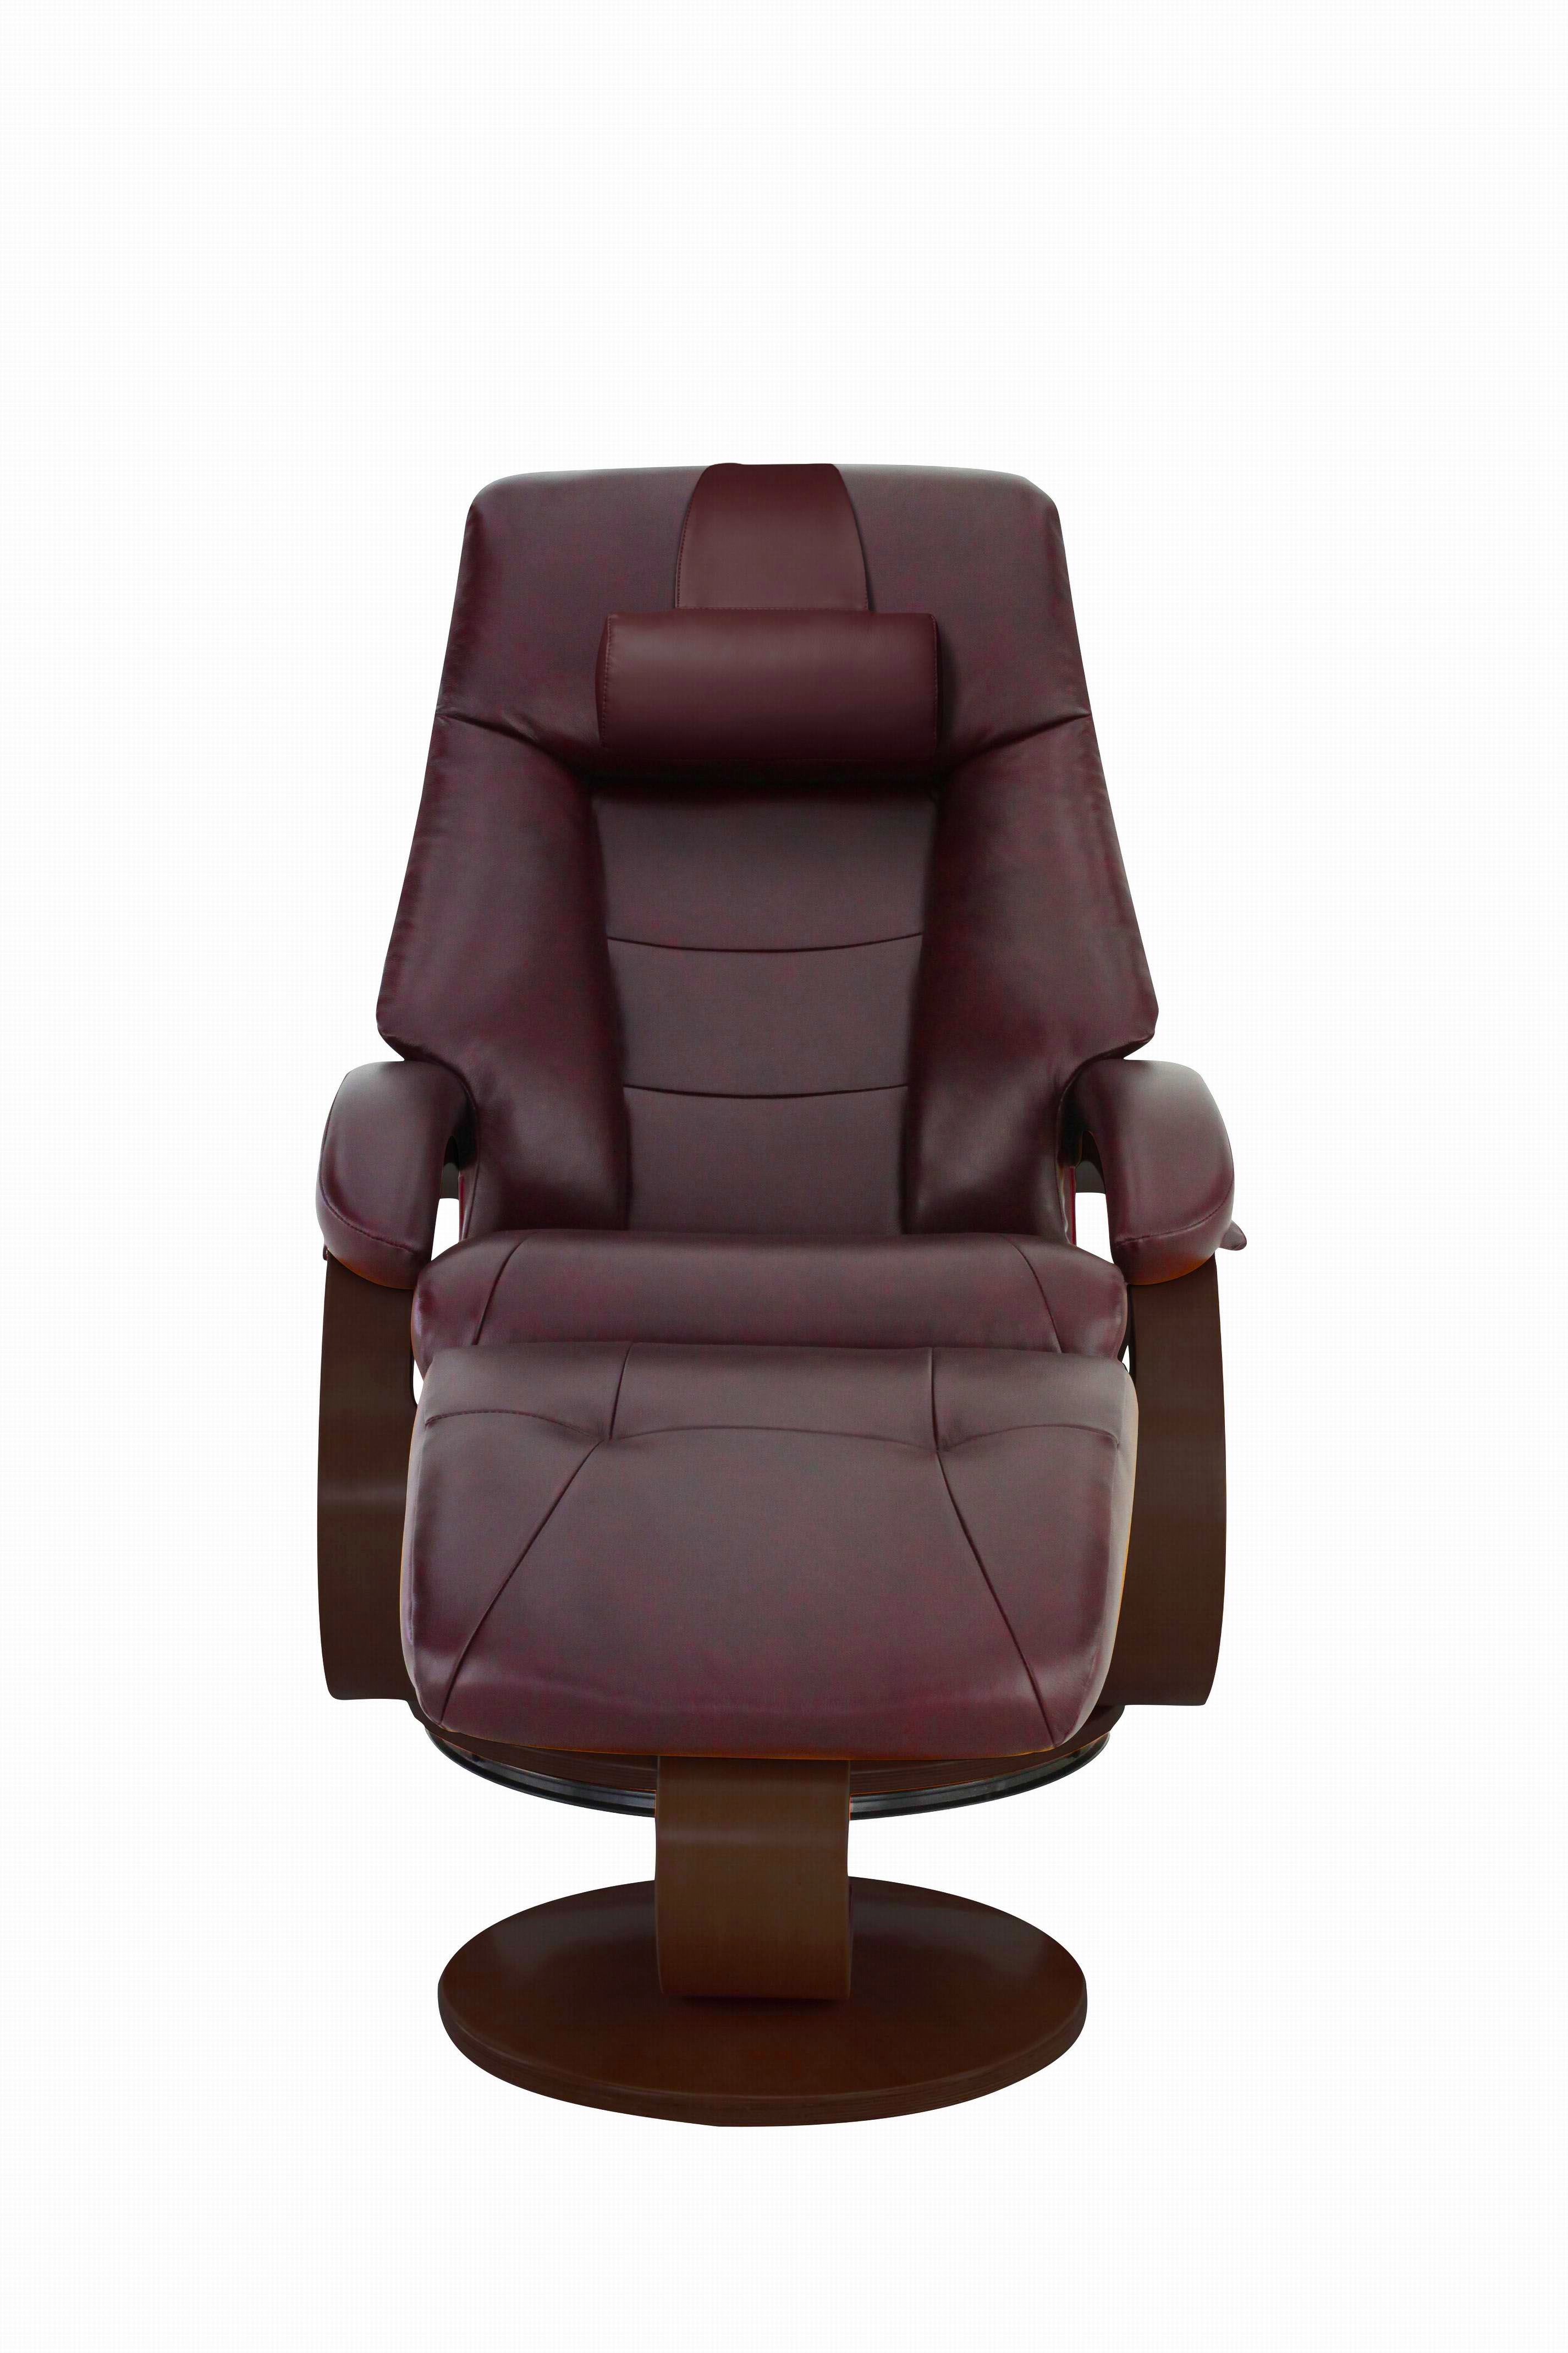 Burgundy Top Grain Leather Recliner and Ottoman with Pillow